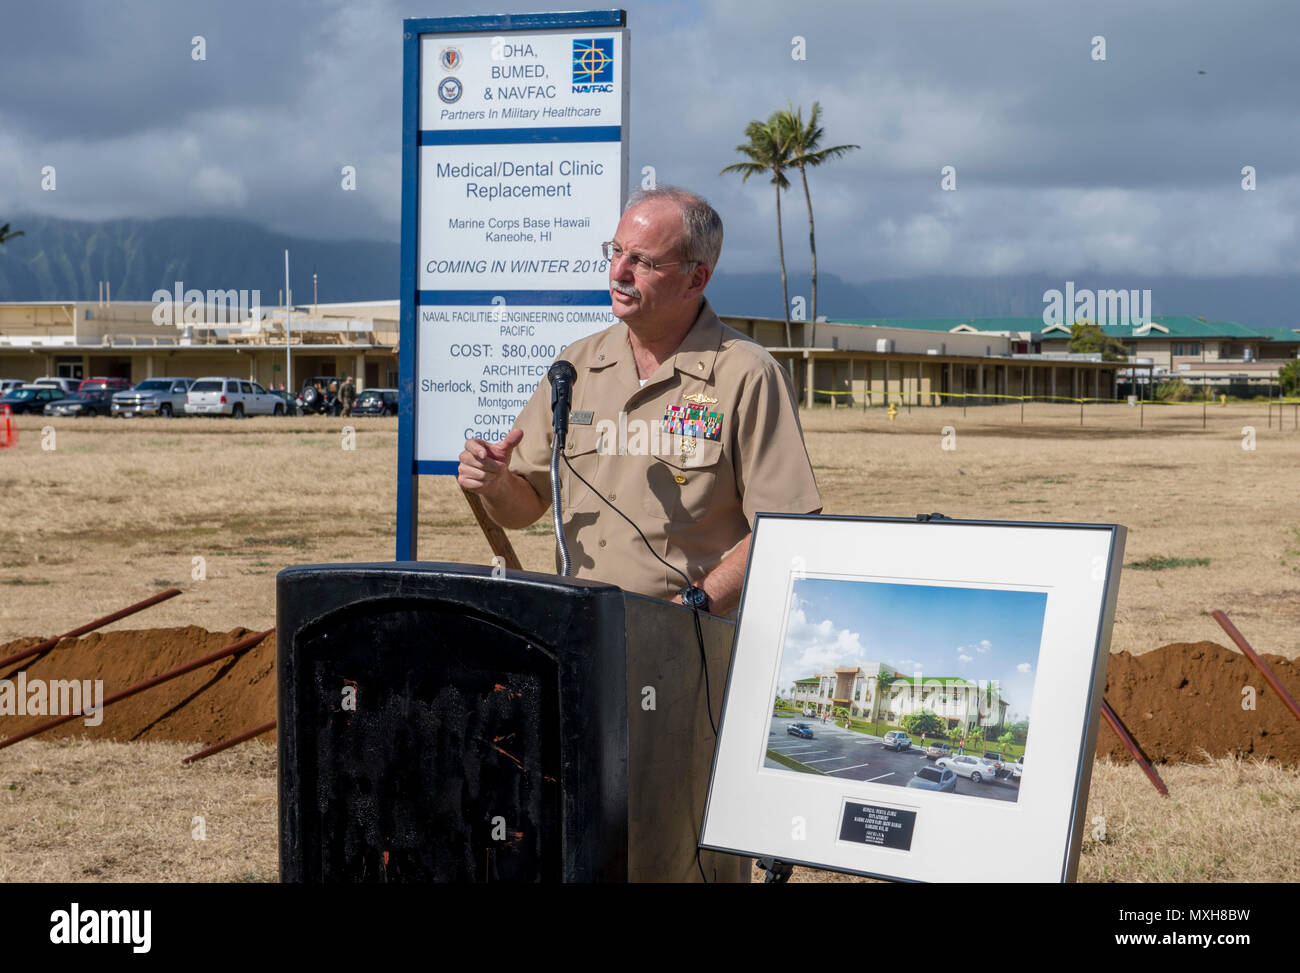 161108-N-YW024-027 KANEOHE BAY, Hawaii (Nov. 8, 2016)  Rear Adm. Bruce Gillingham, commander, Navy Medicine West, San Diego, delivers opening remarks during a groundbreaking ceremony for Naval Medical and Dental Replacement Clinic at Marine Corps Base Hawaii (MCBH). The new medical and dental clinic will provide Navy Medicine and Marine Forces Medical personnel with state-of-the-art working spaces to keep the Navy and Marine Corps operational forces ready, healthy and on the job. (U.S. Navy photo by Petty Officer 2nd Class Katarzyna Kobiljak) Stock Photo